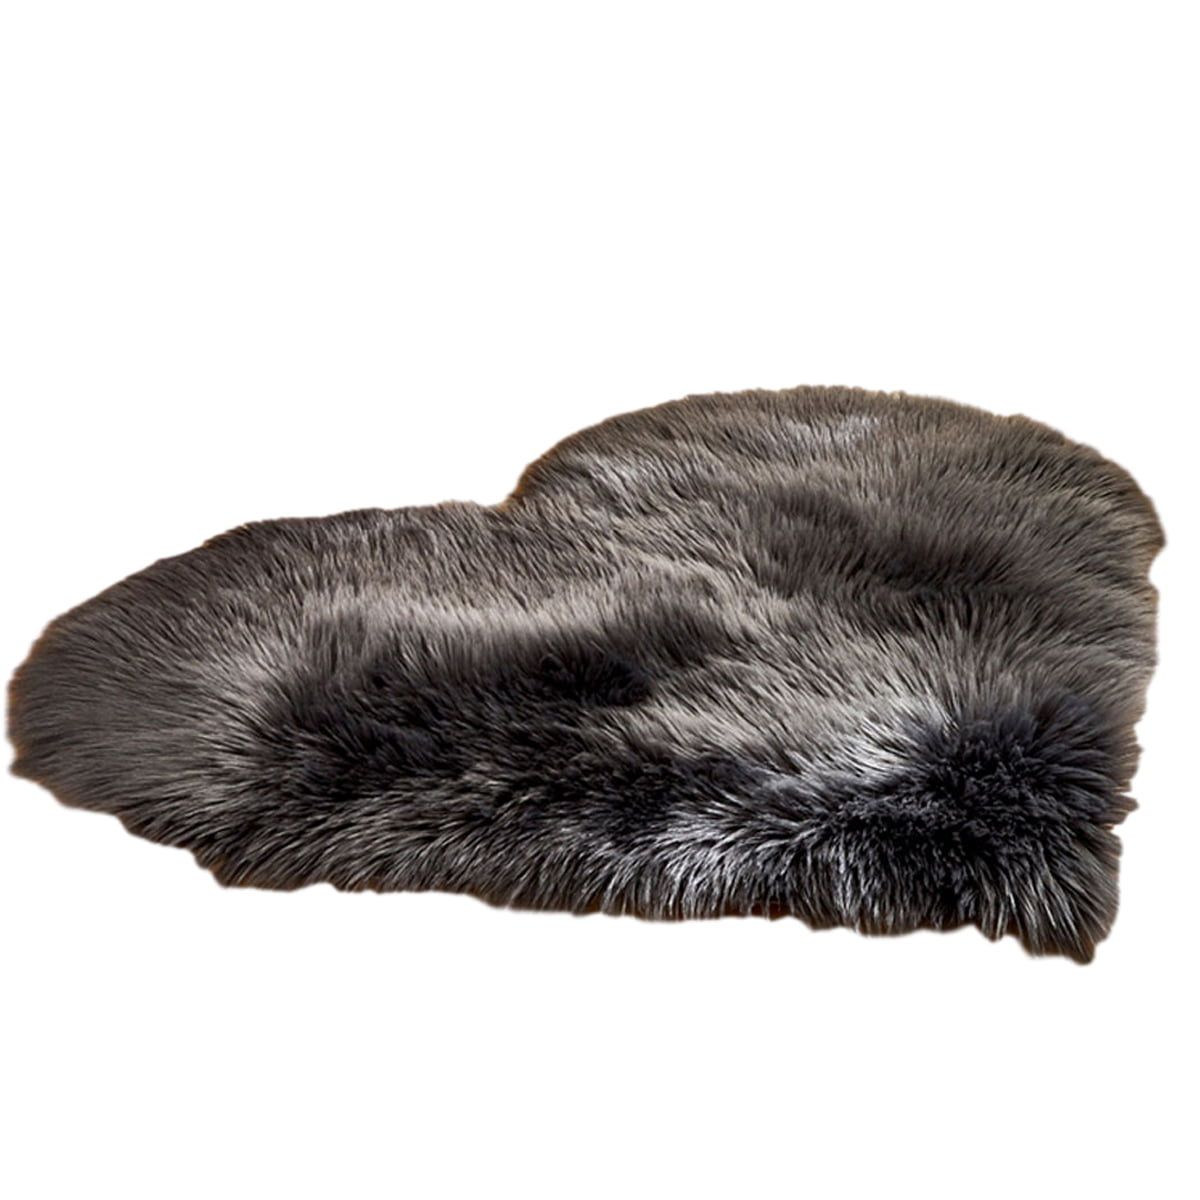 Details about   Round Plush Carpet Faux Wool Fur Hairy Furry Seat Pad Bedroom Area Rug 50CM Soft 